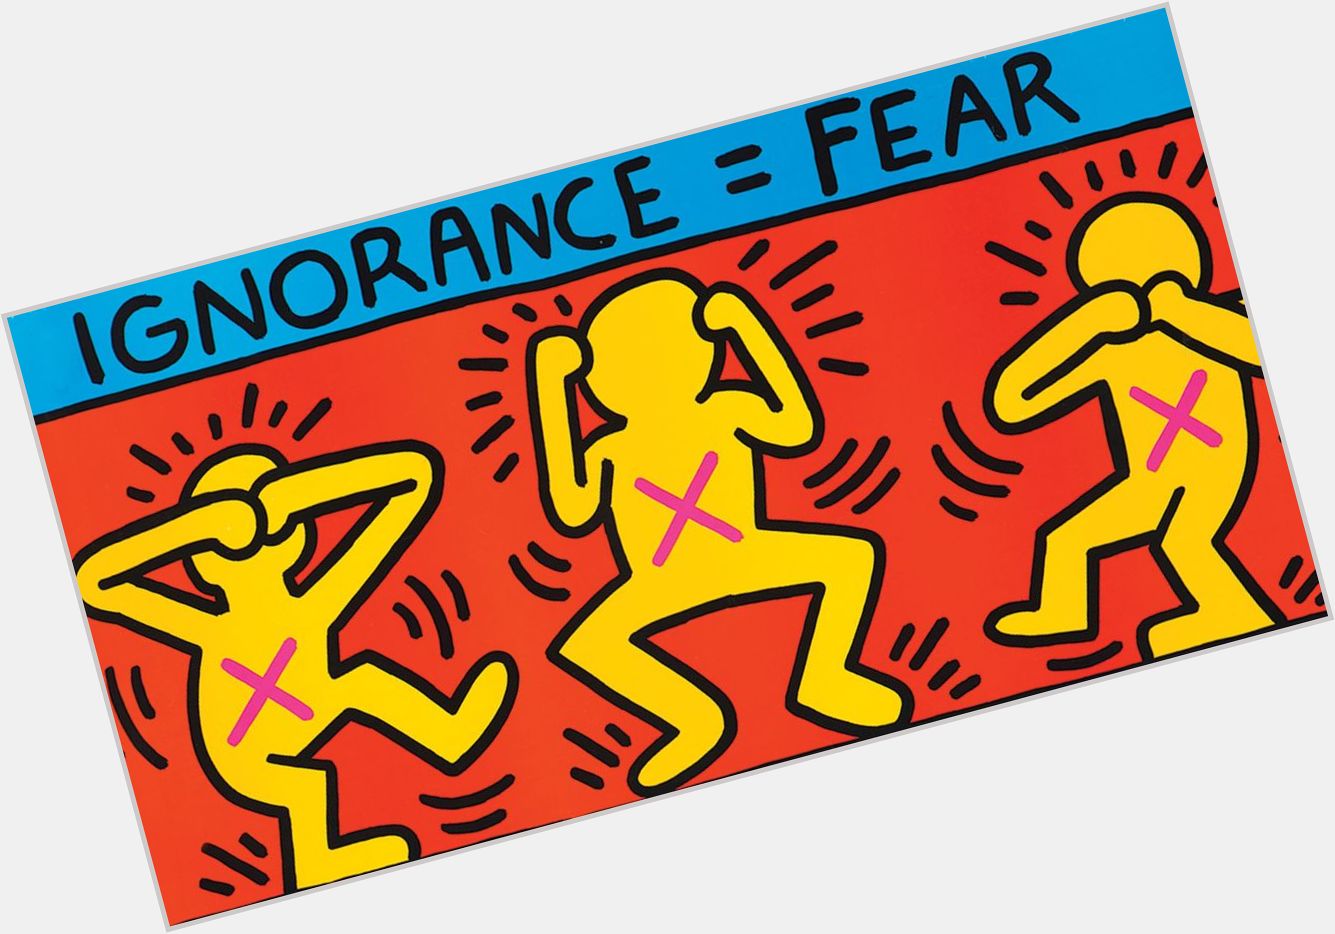 Happy Birthday, Keith Haring! You are missed, but your art and messages live on. 